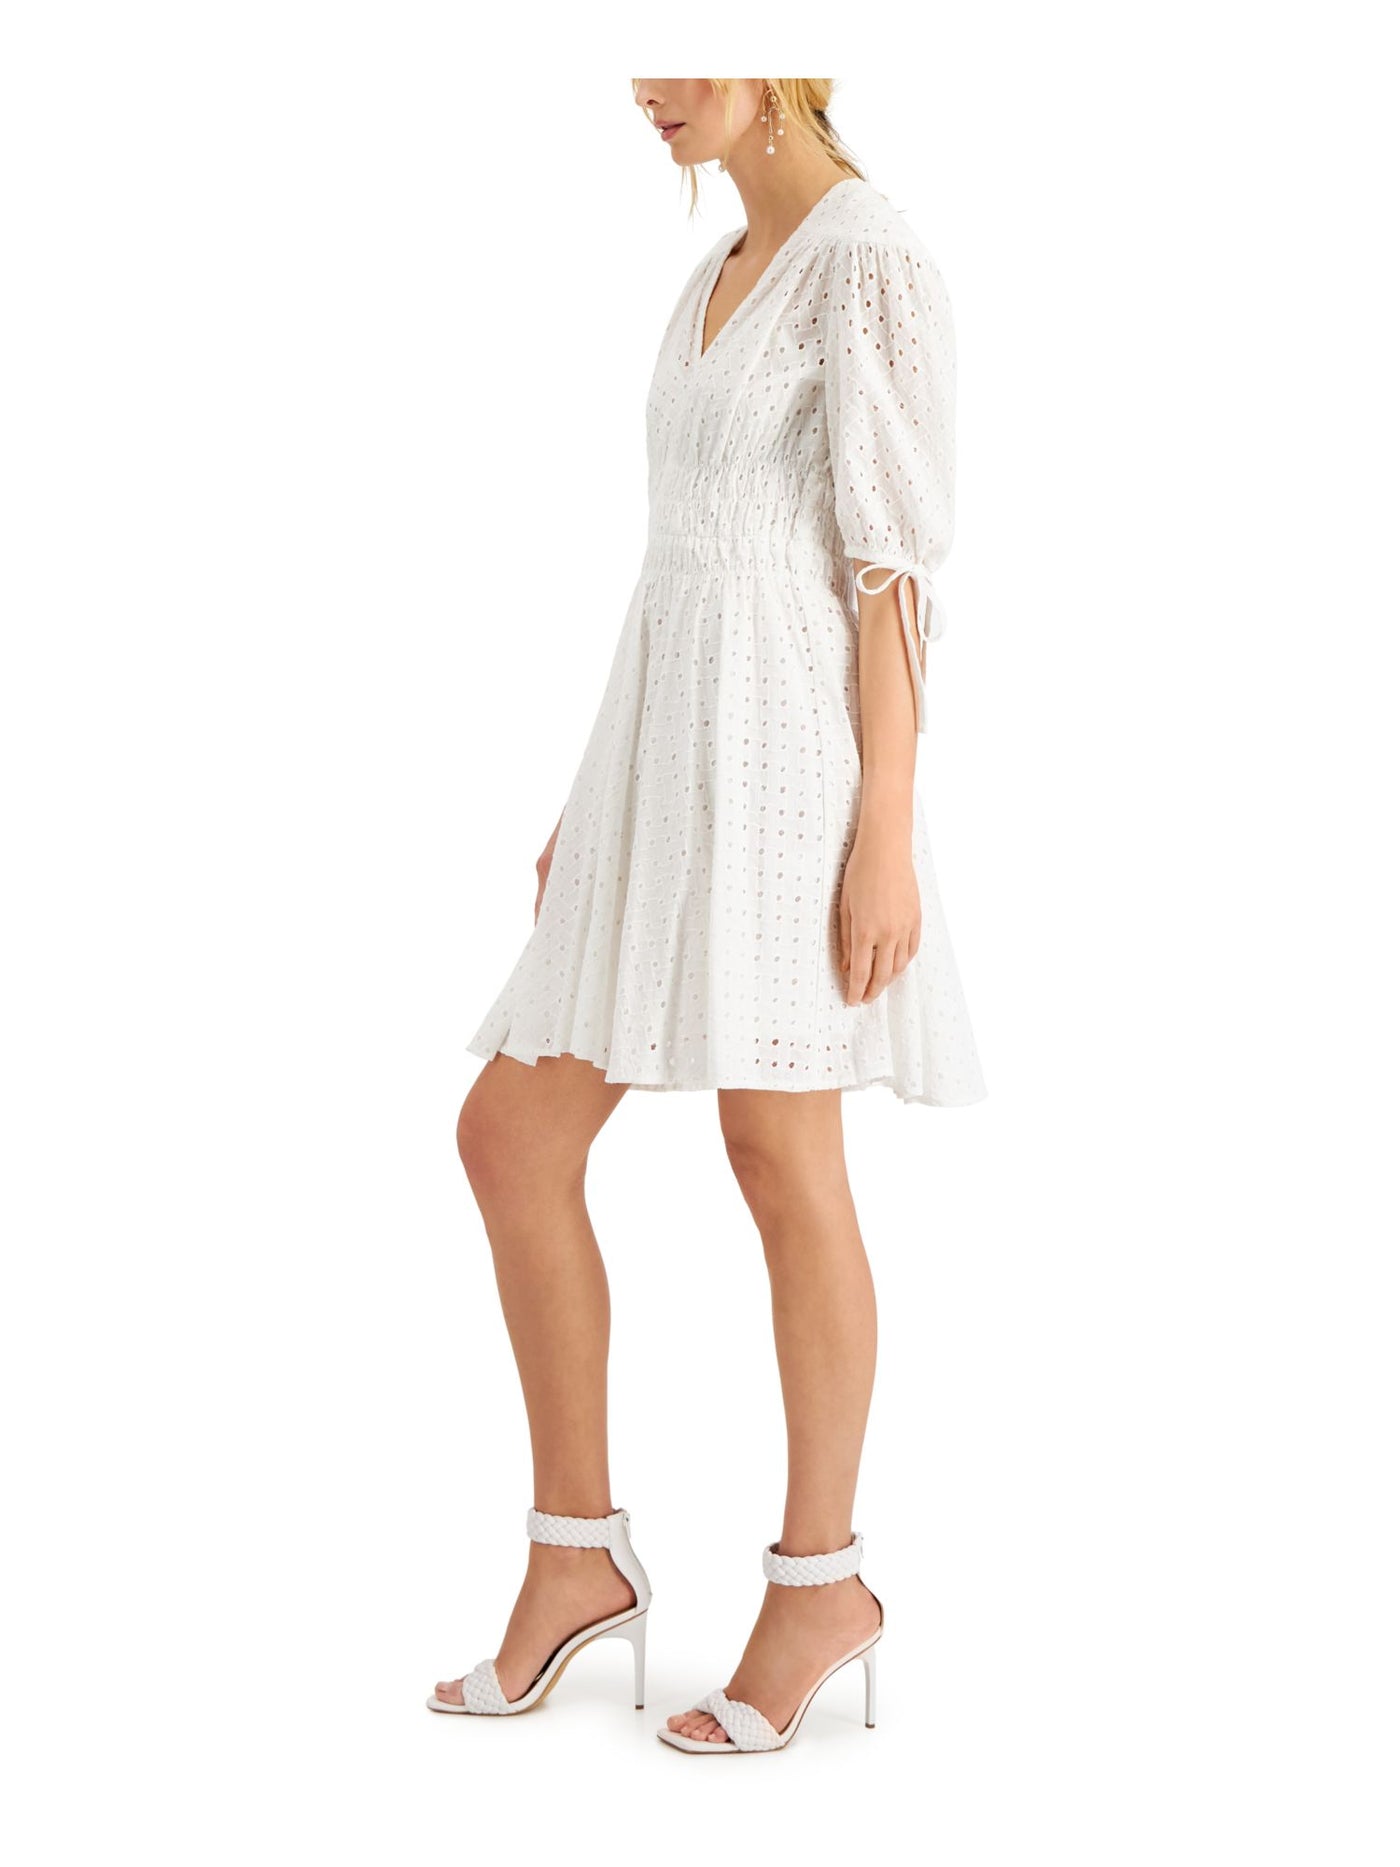 TAYLOR PETITE Womens White Eyelet Smocked Tie Lined Sheer Pullover Elbow Sleeve V Neck Above The Knee Fit + Flare Dress Petites 8P